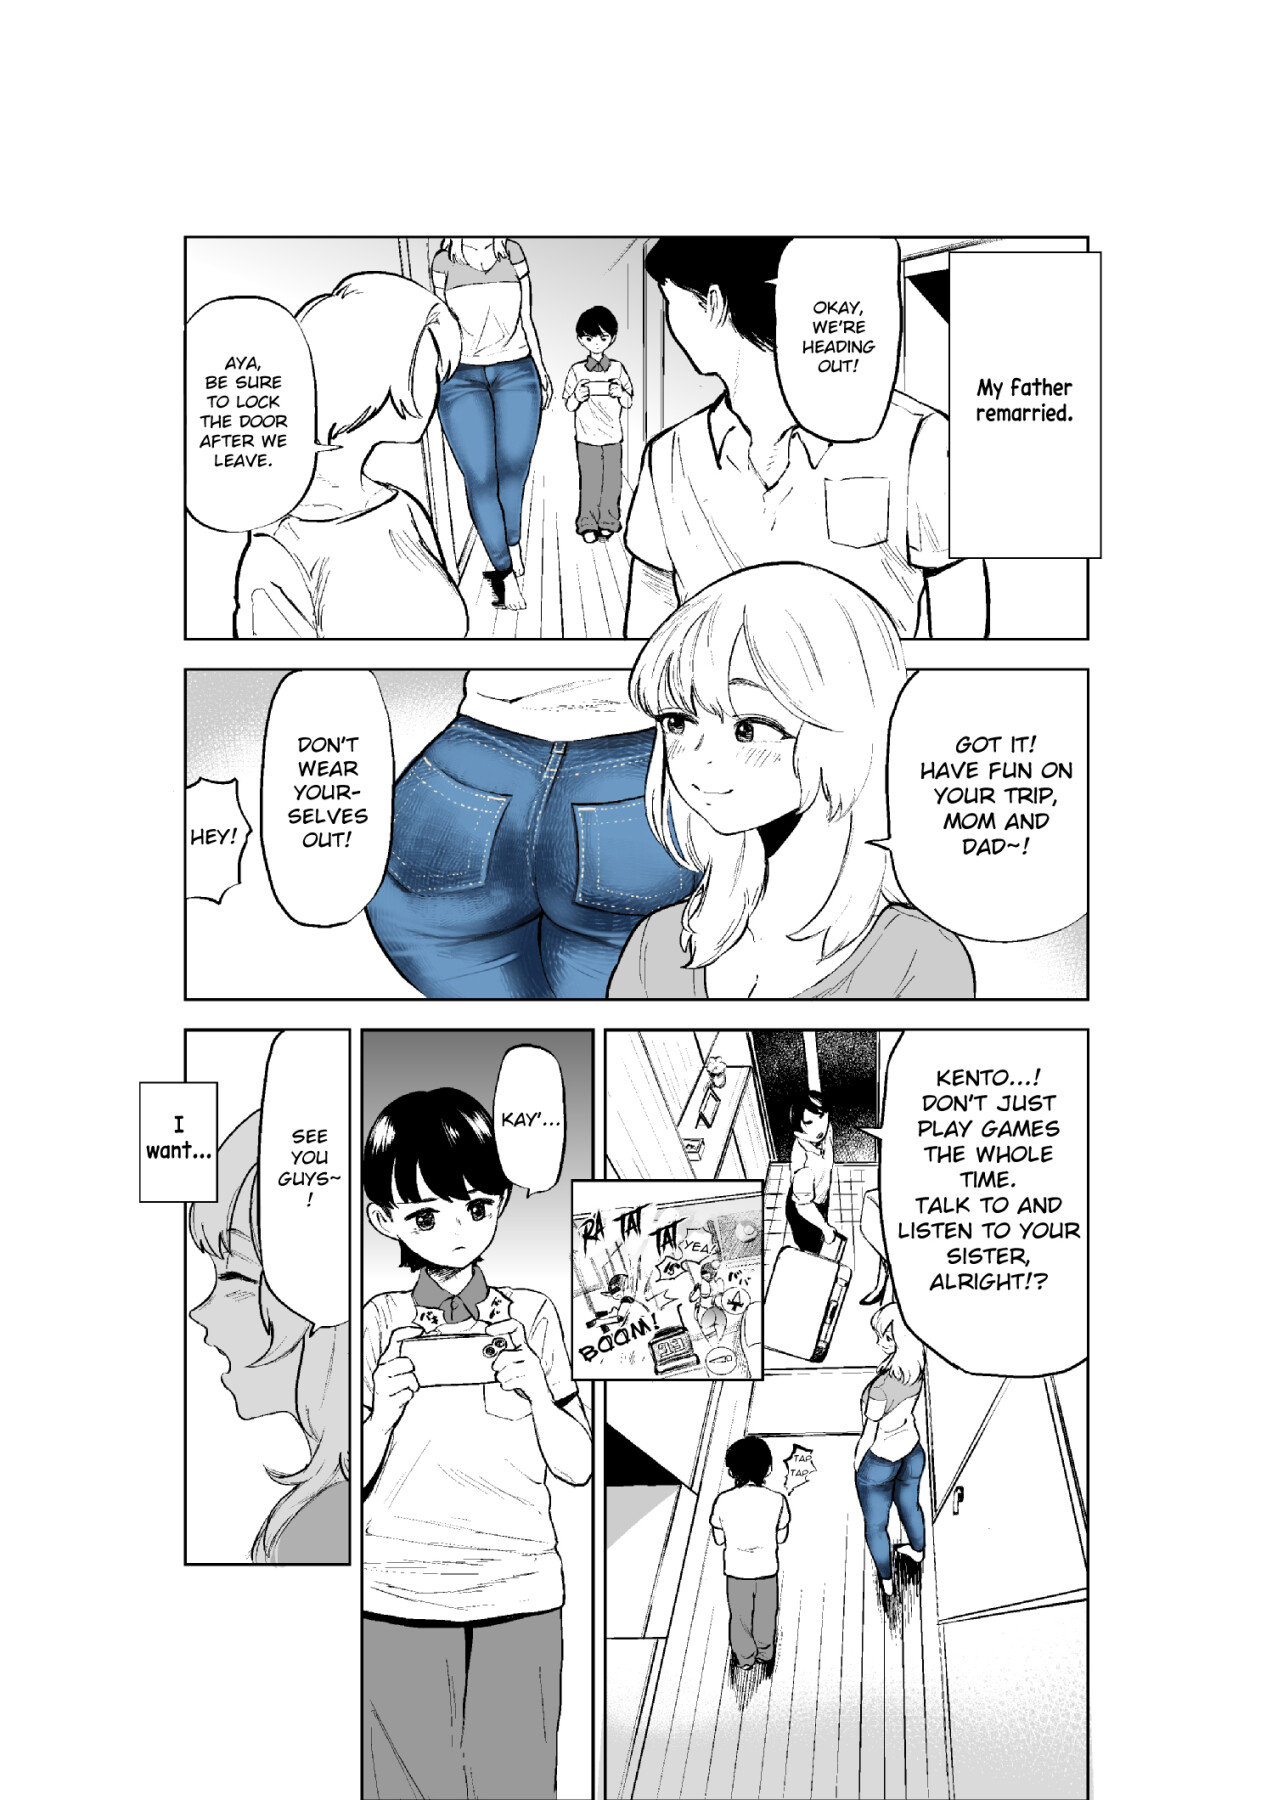 Hentai Manga Comic-The Story of How My Step-sister and I got Closer-Read-2